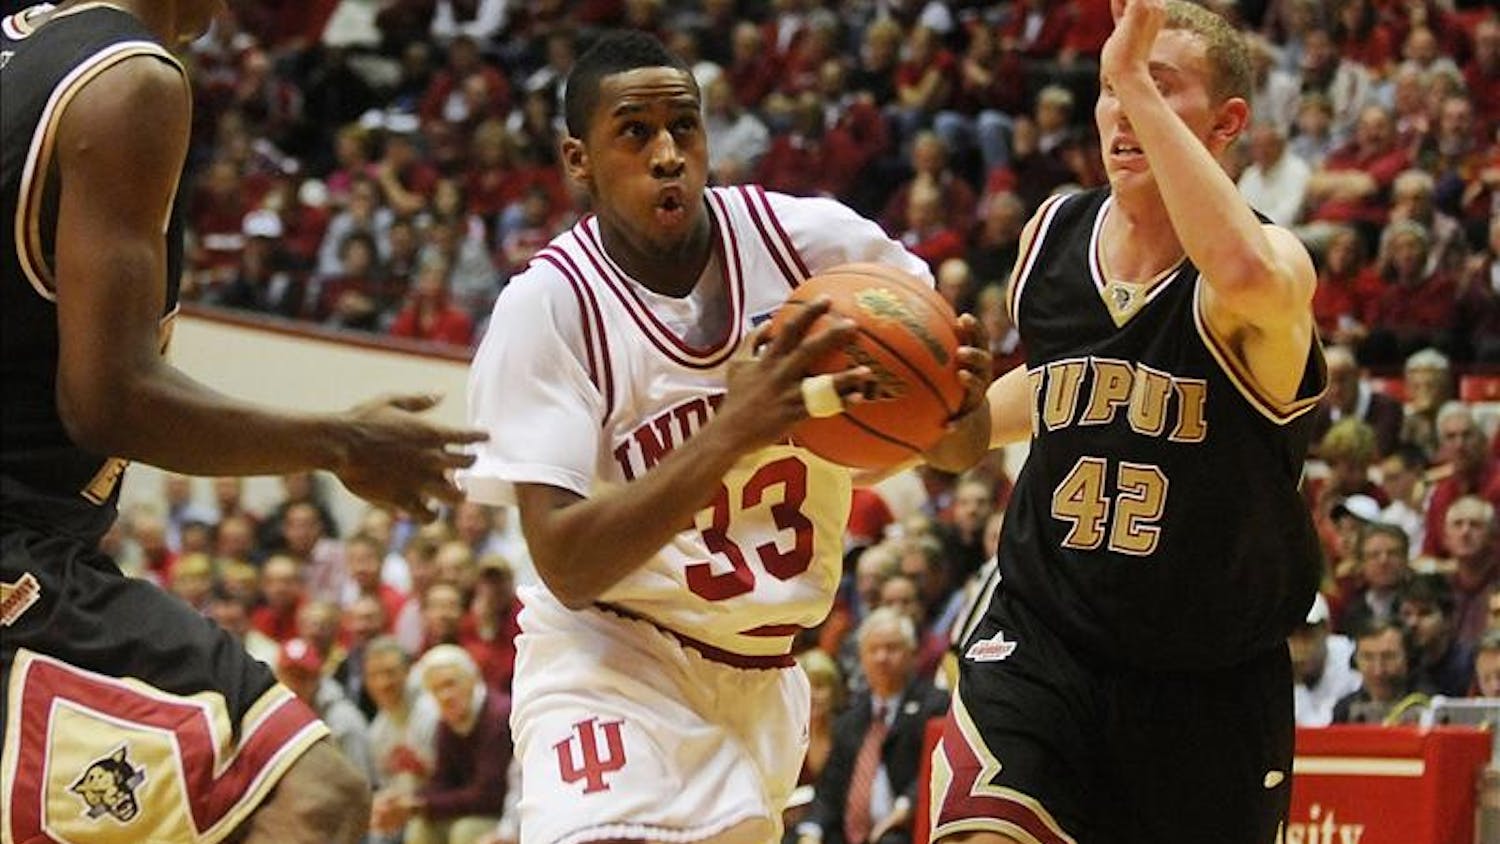 IU guard Devan Dumes navigates the lane during IU's 60-57 win over IU-Purdue University Indianapolis Nov.19, 2008 at Assembly Hall. Dumes had 10 points.